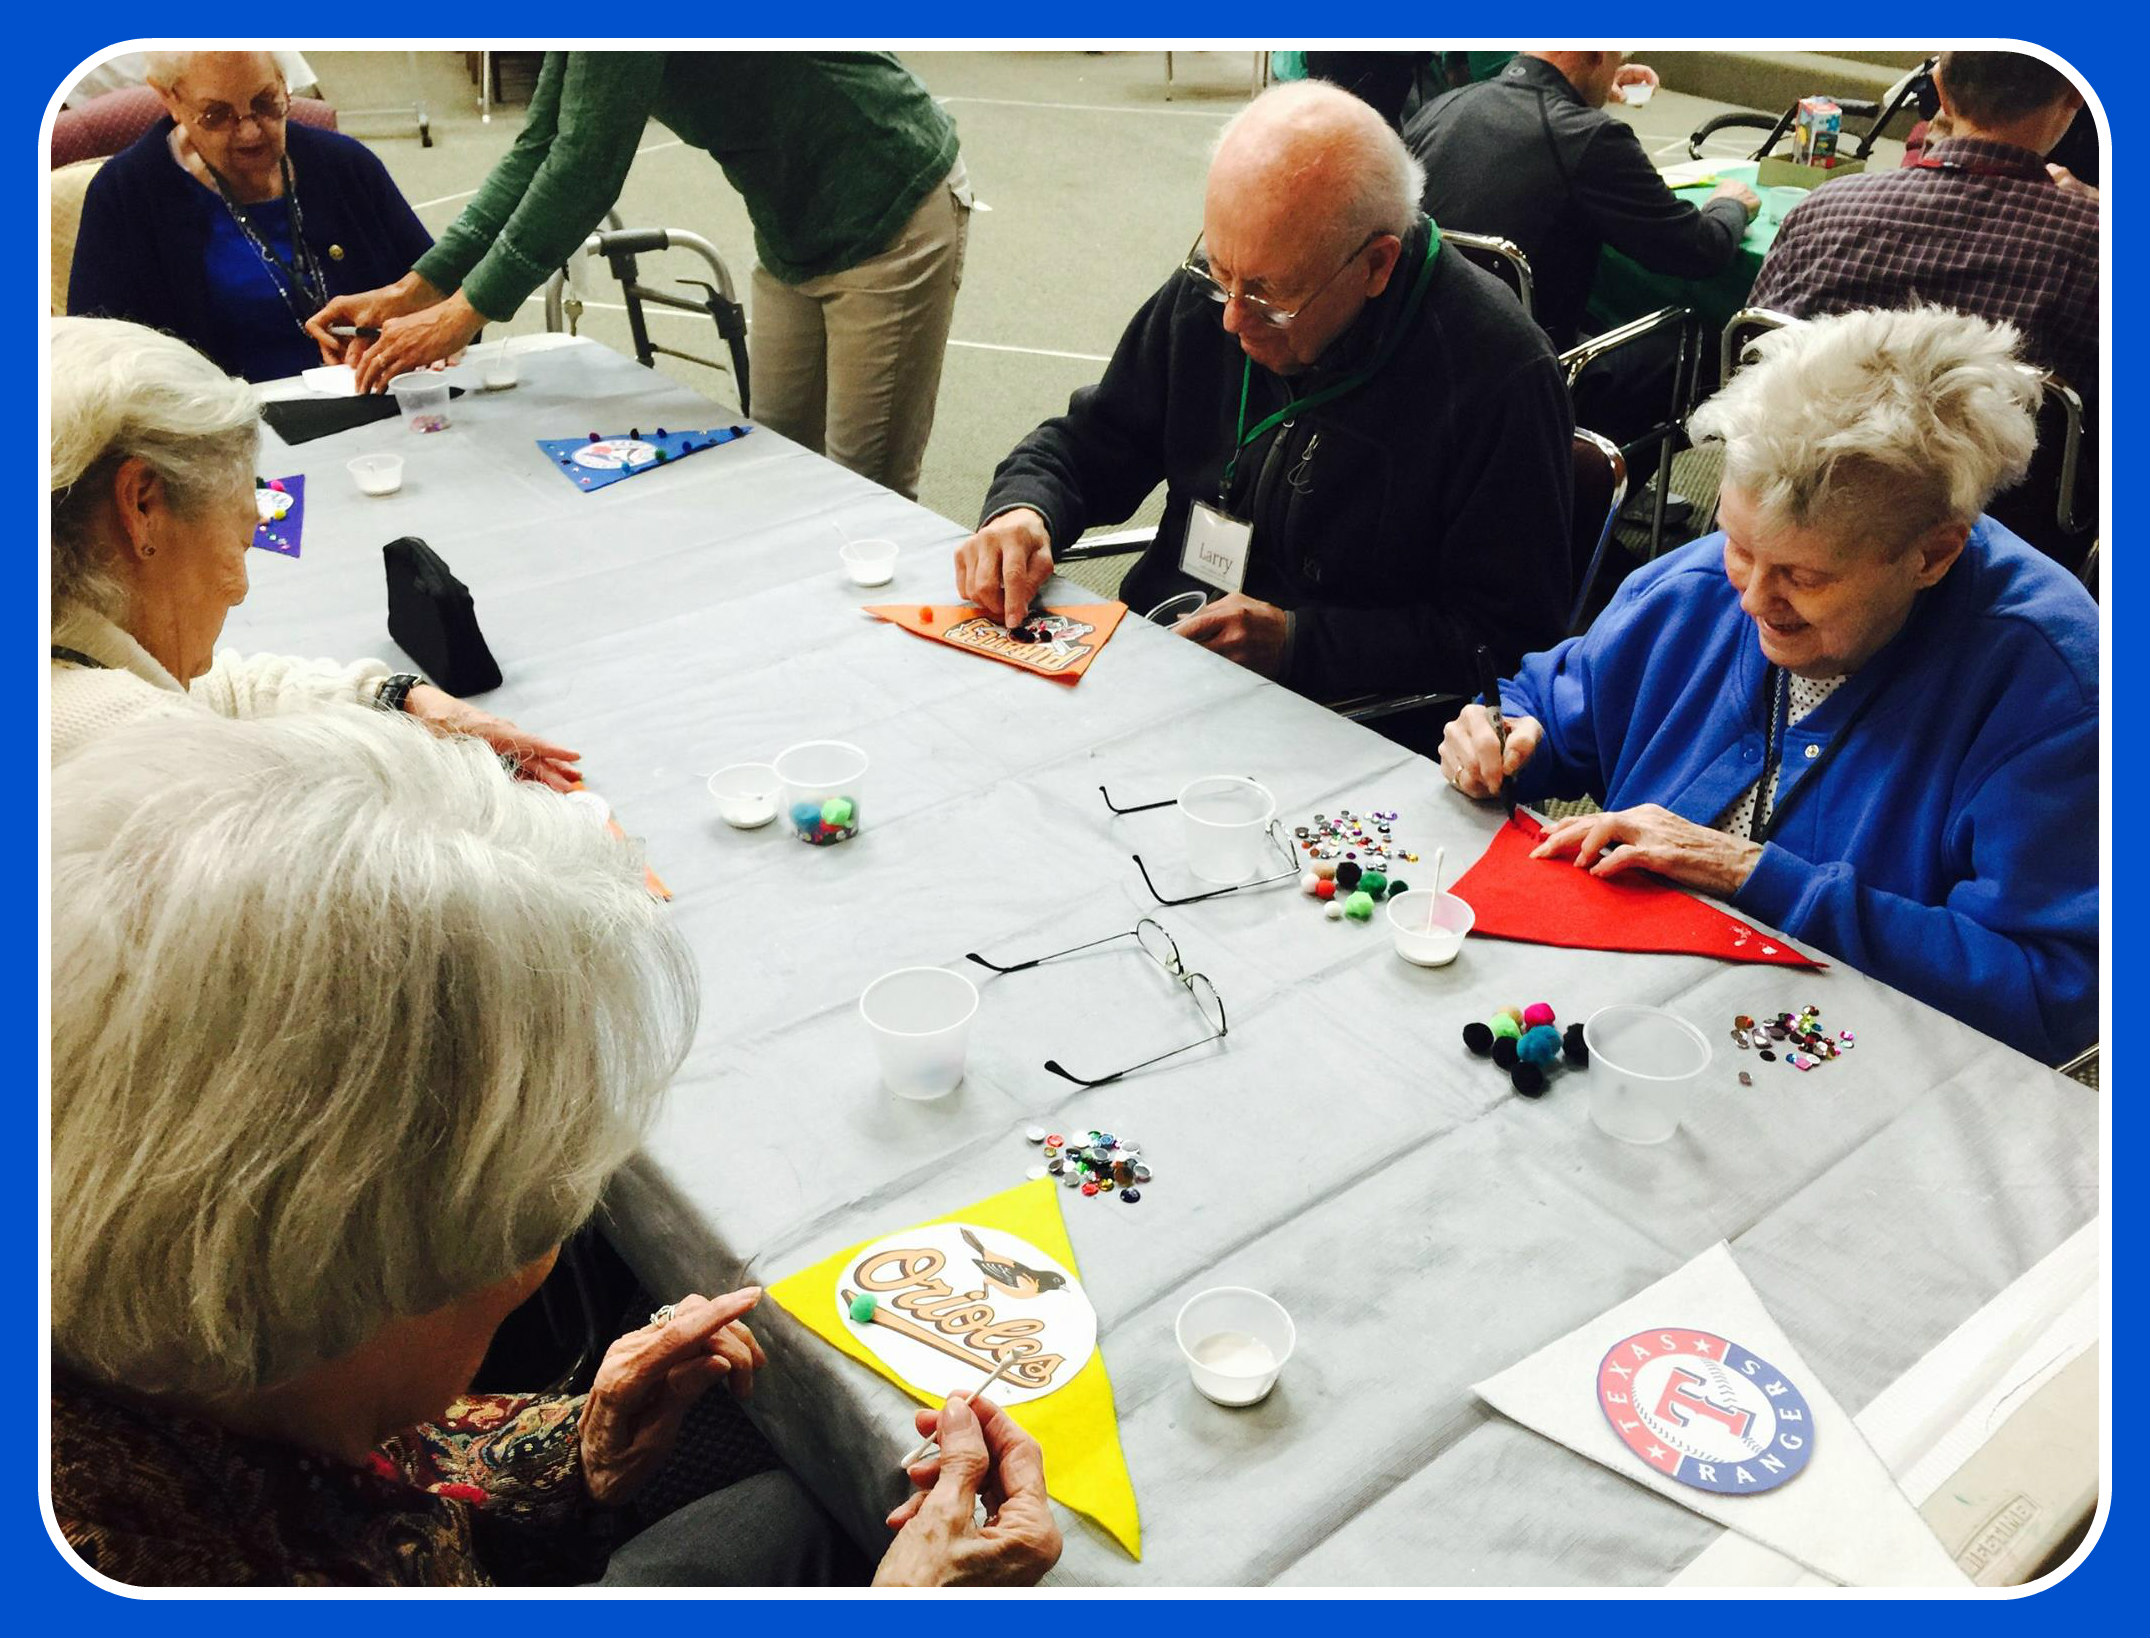 Top 5 Reasons to Use Adult Day Care